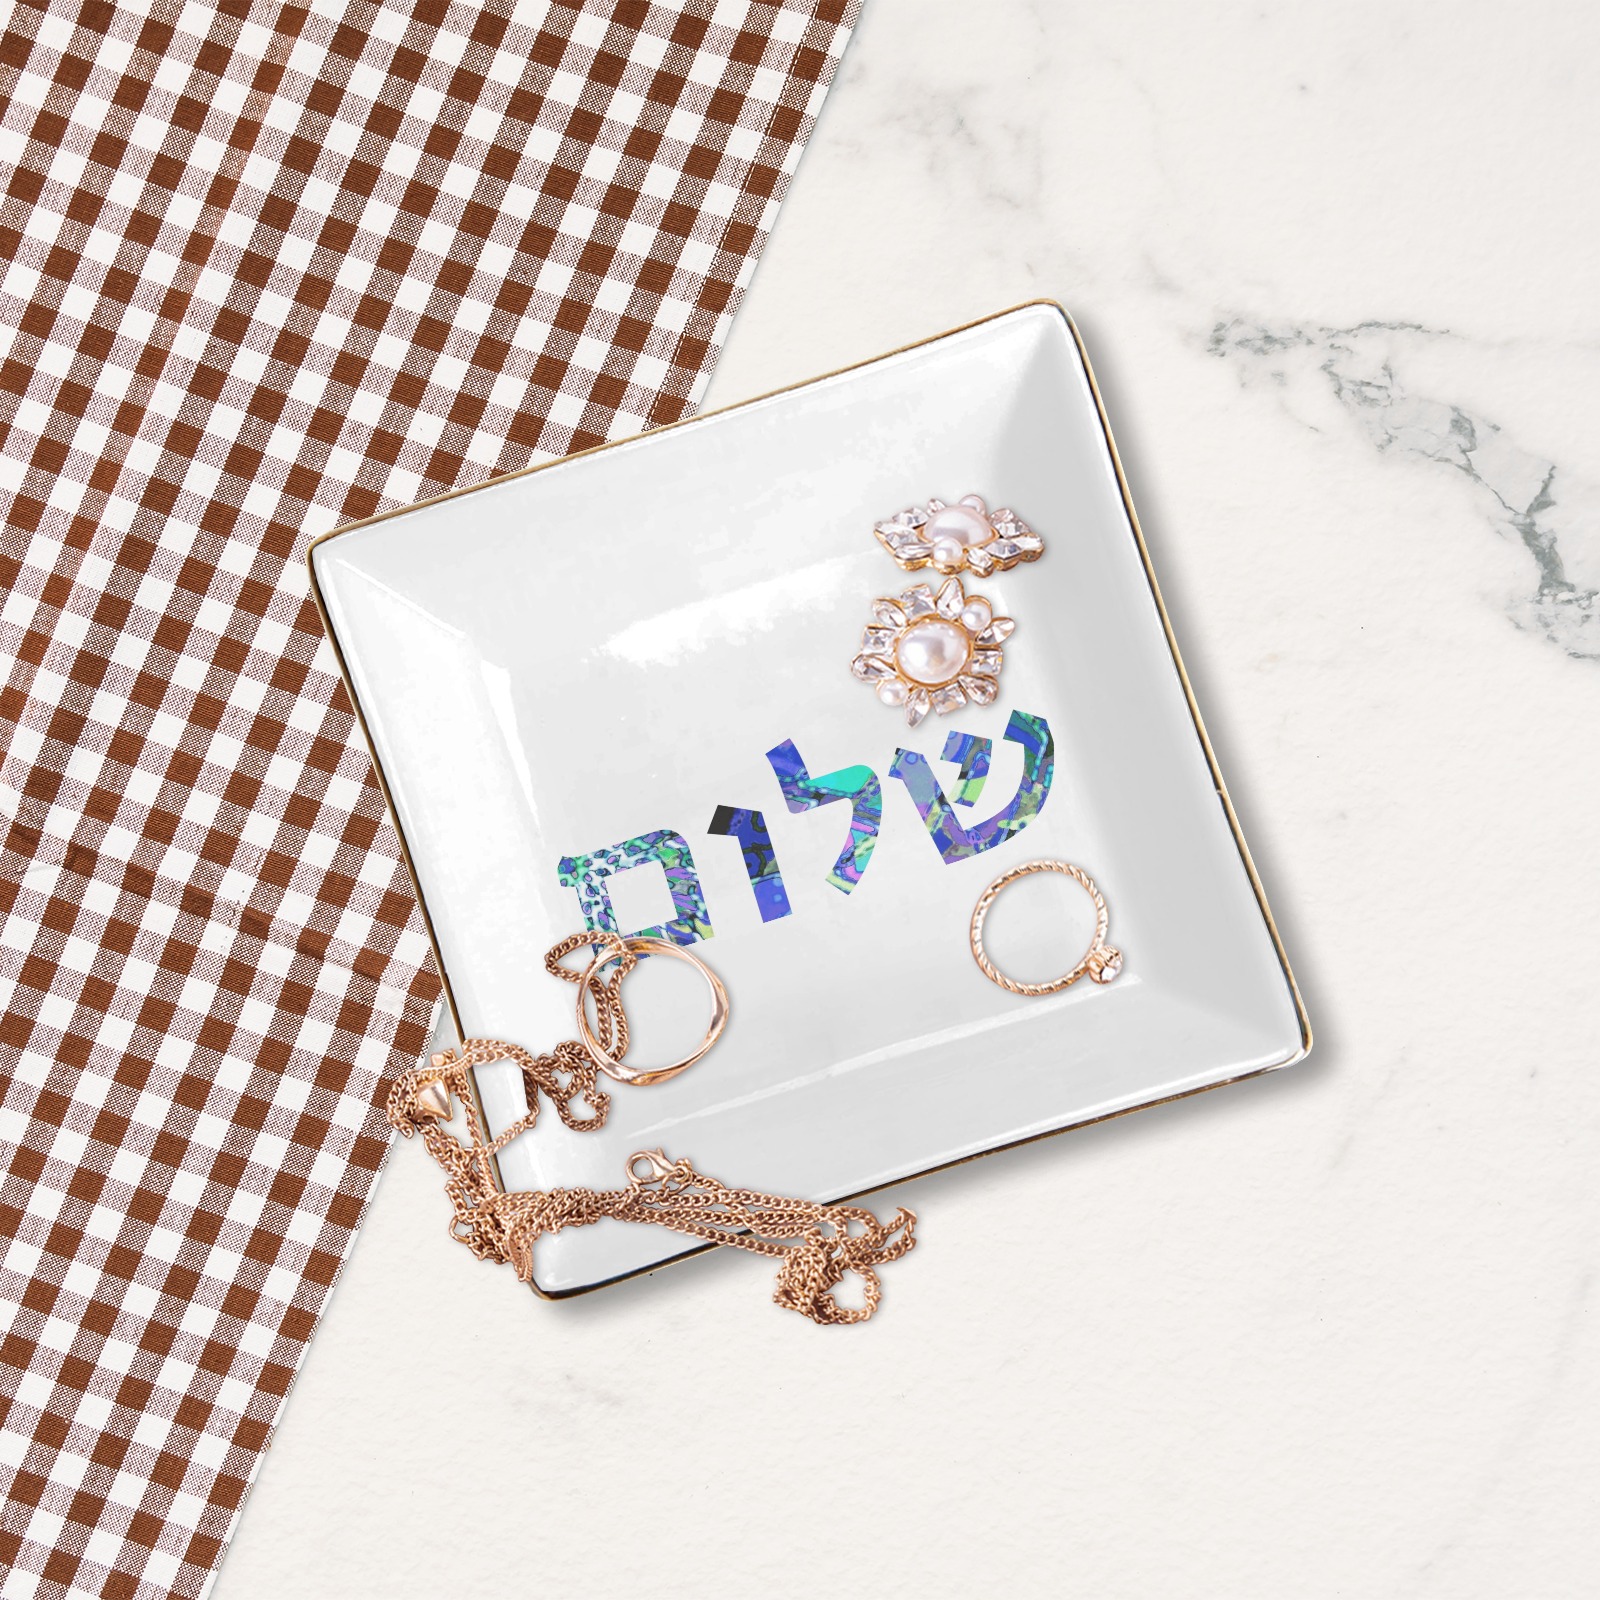 shalom 5 Square Jewelry Tray with Golden Edge